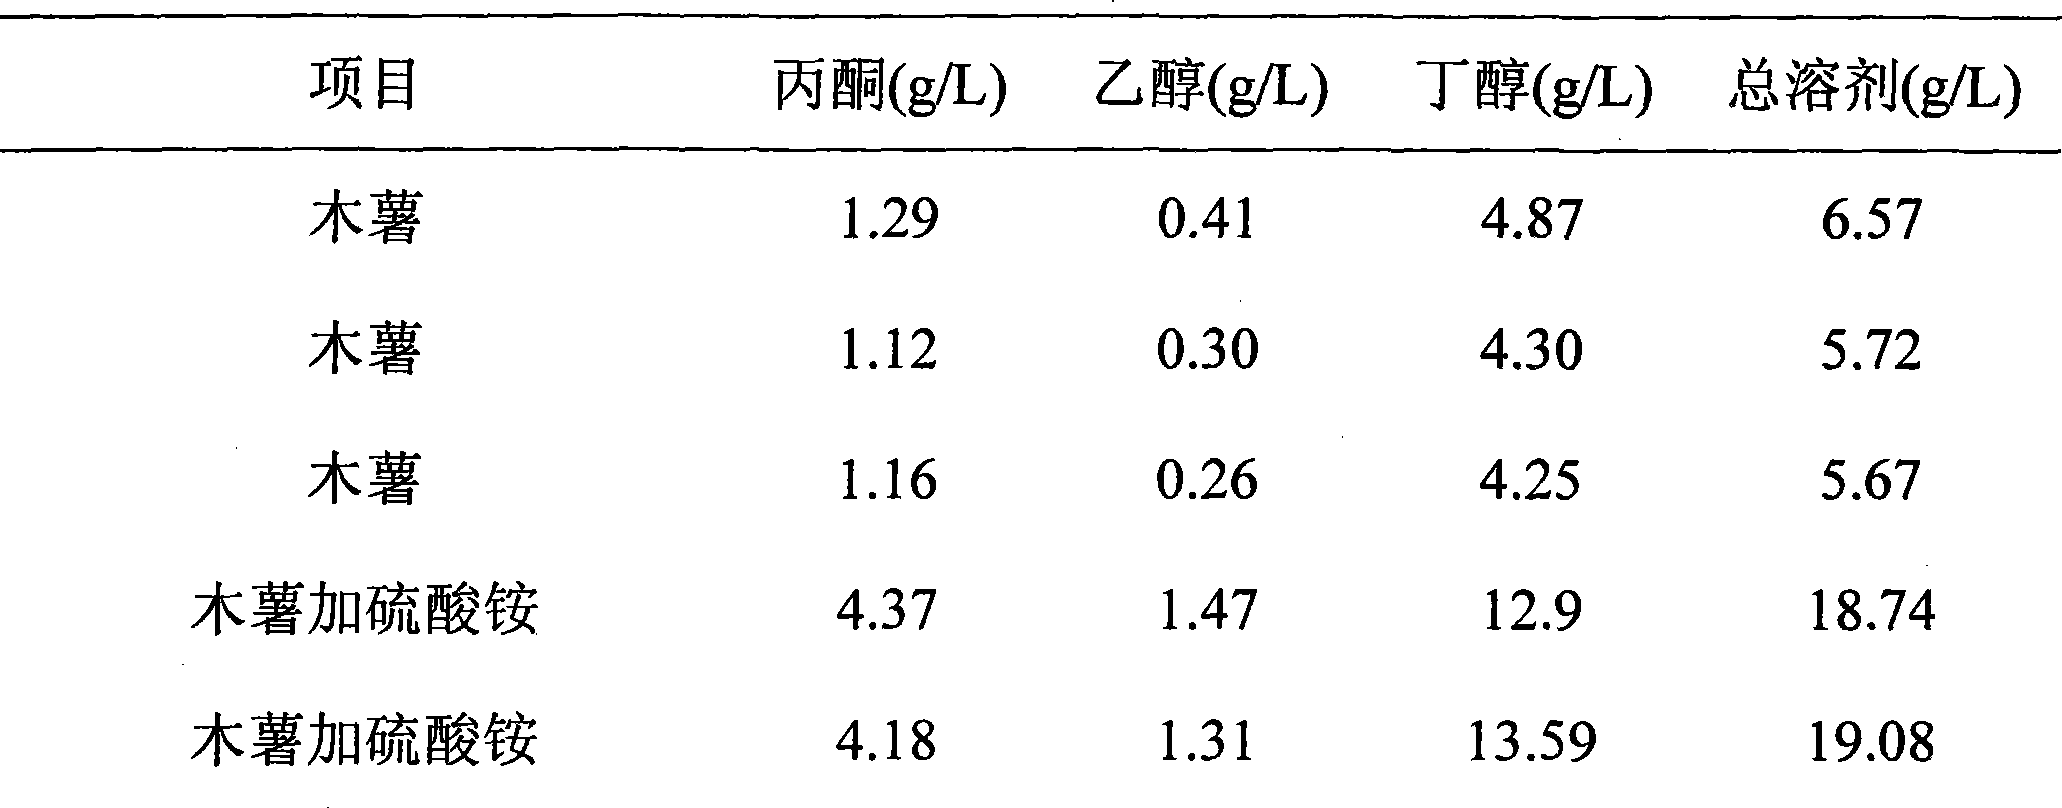 Method for improving yield of acetone, butanol and ethanol produced by fermentation of manioc materials